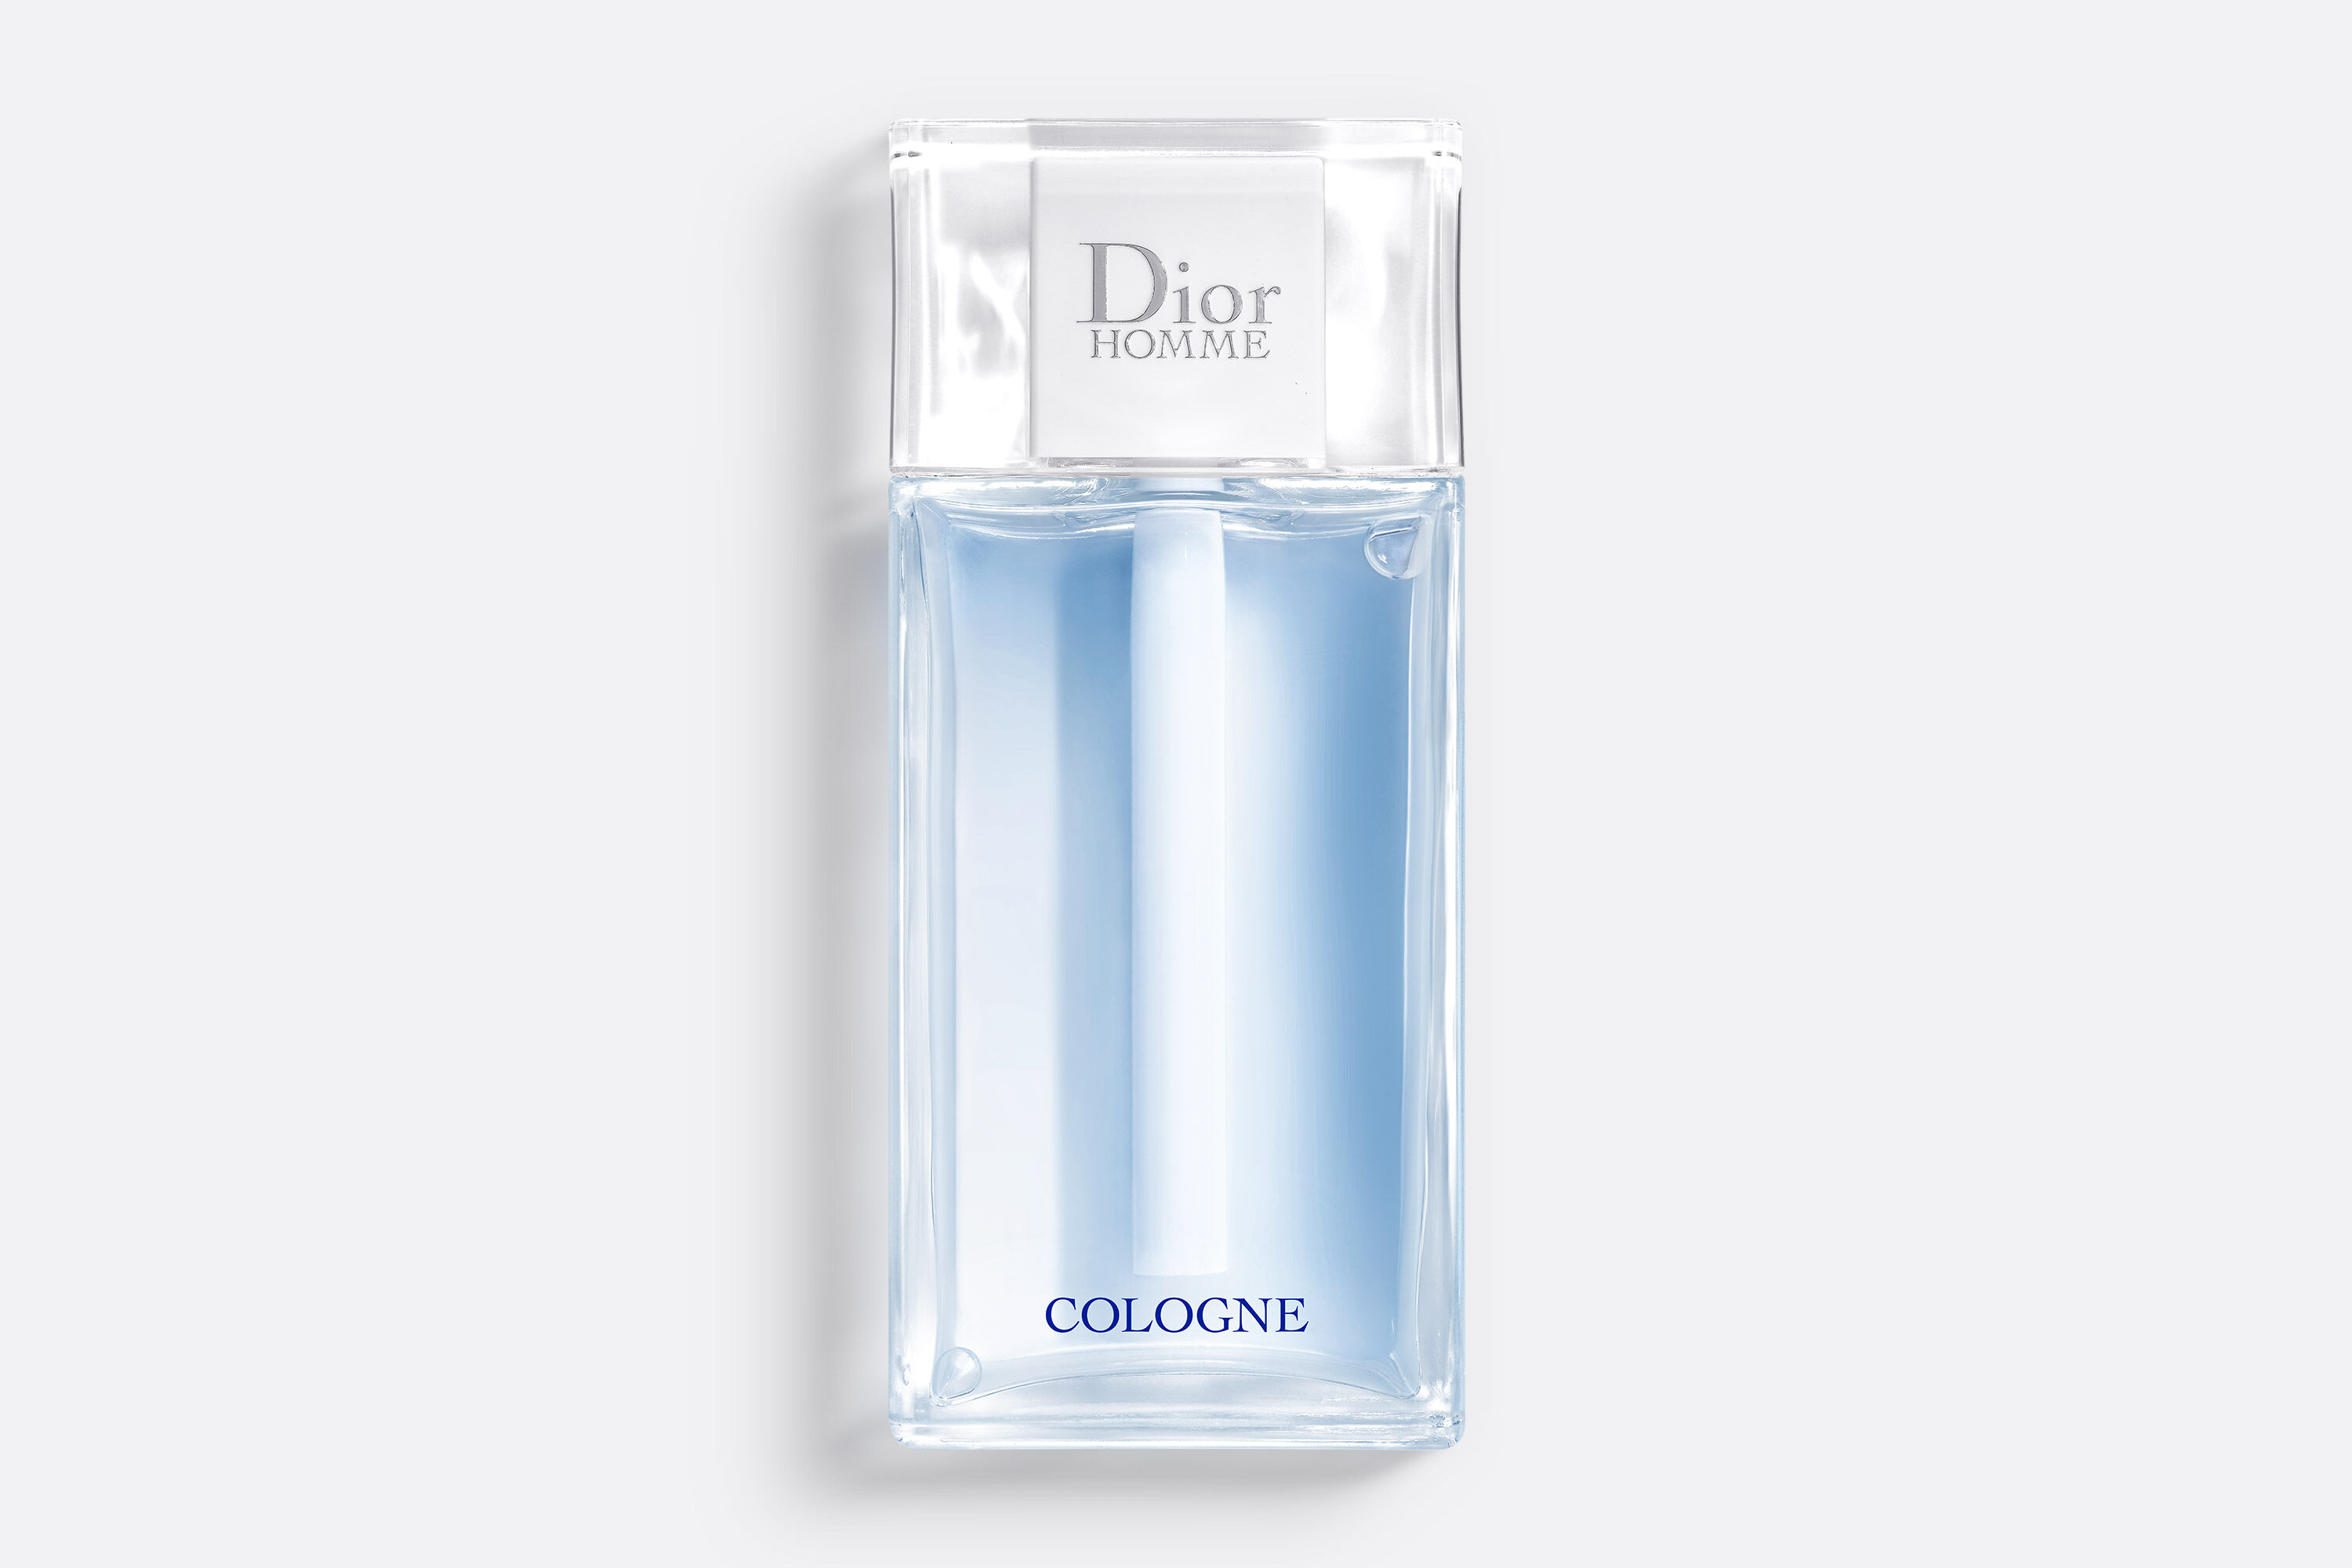 Dior Homme Parfum the noble woody fragrance wrapped in leather  DIOR